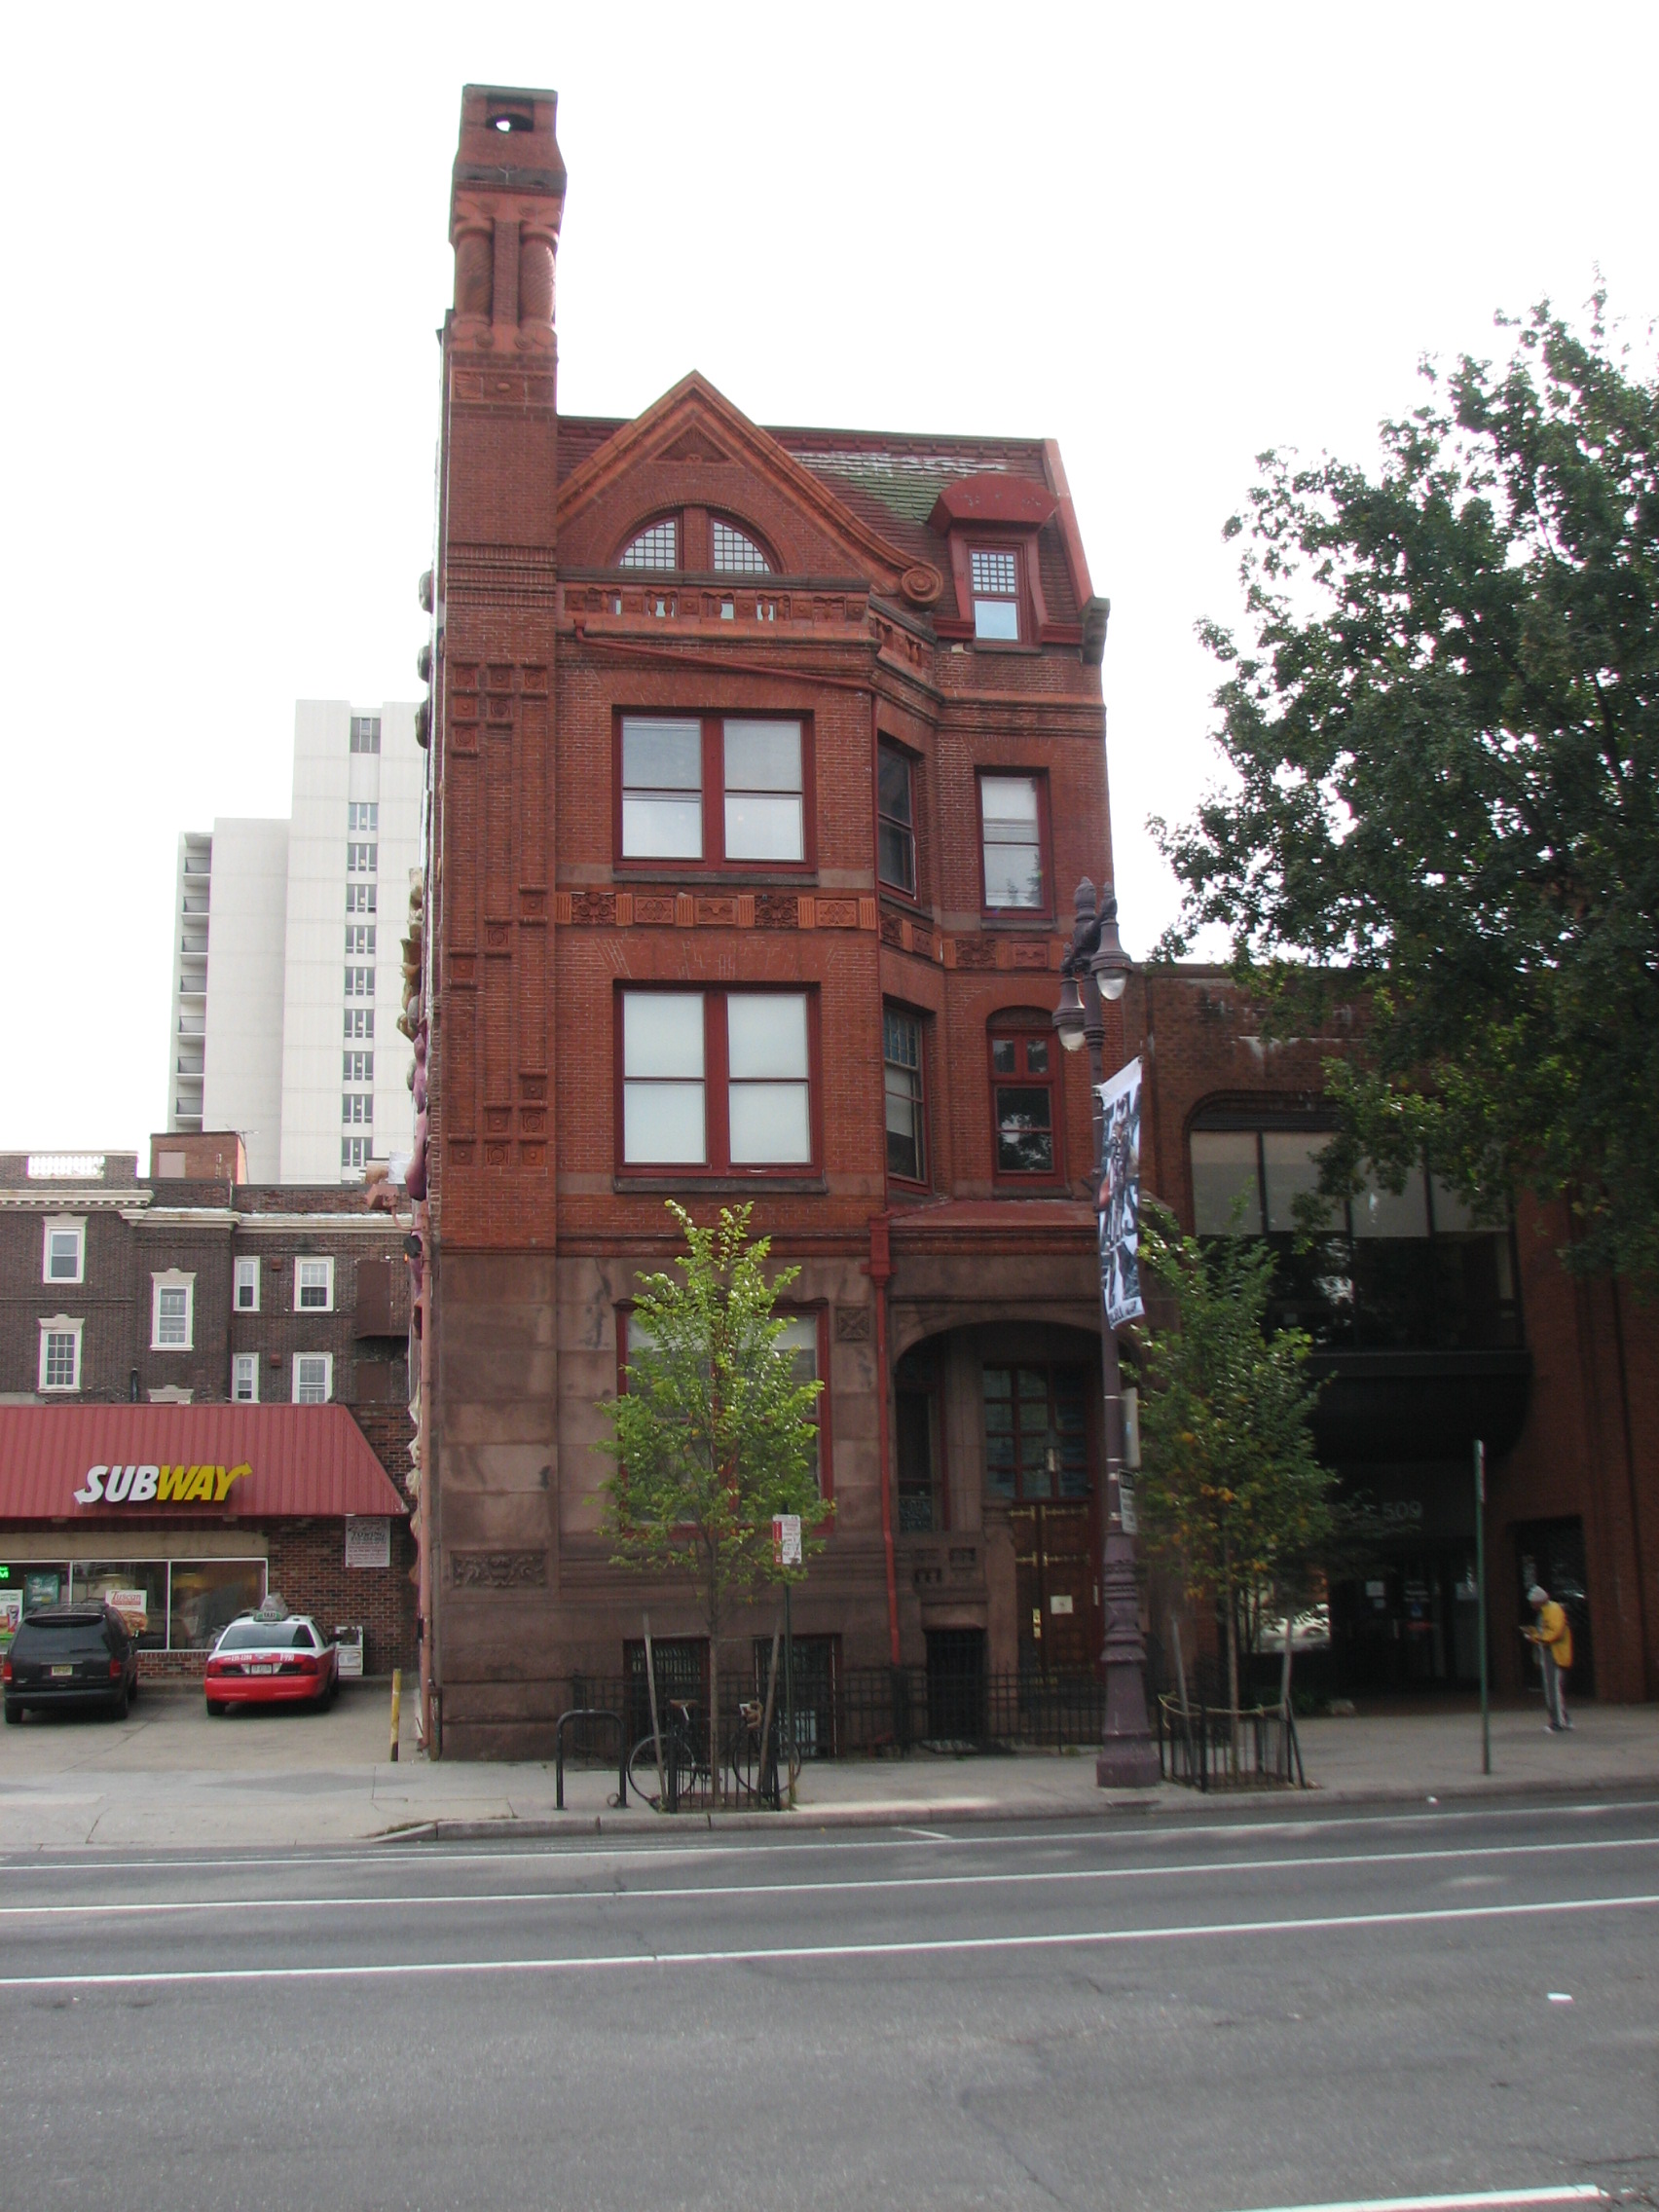 The J. Dundas Lippincott House, 507 S. Broad St., was designed by George T. Pearson. 